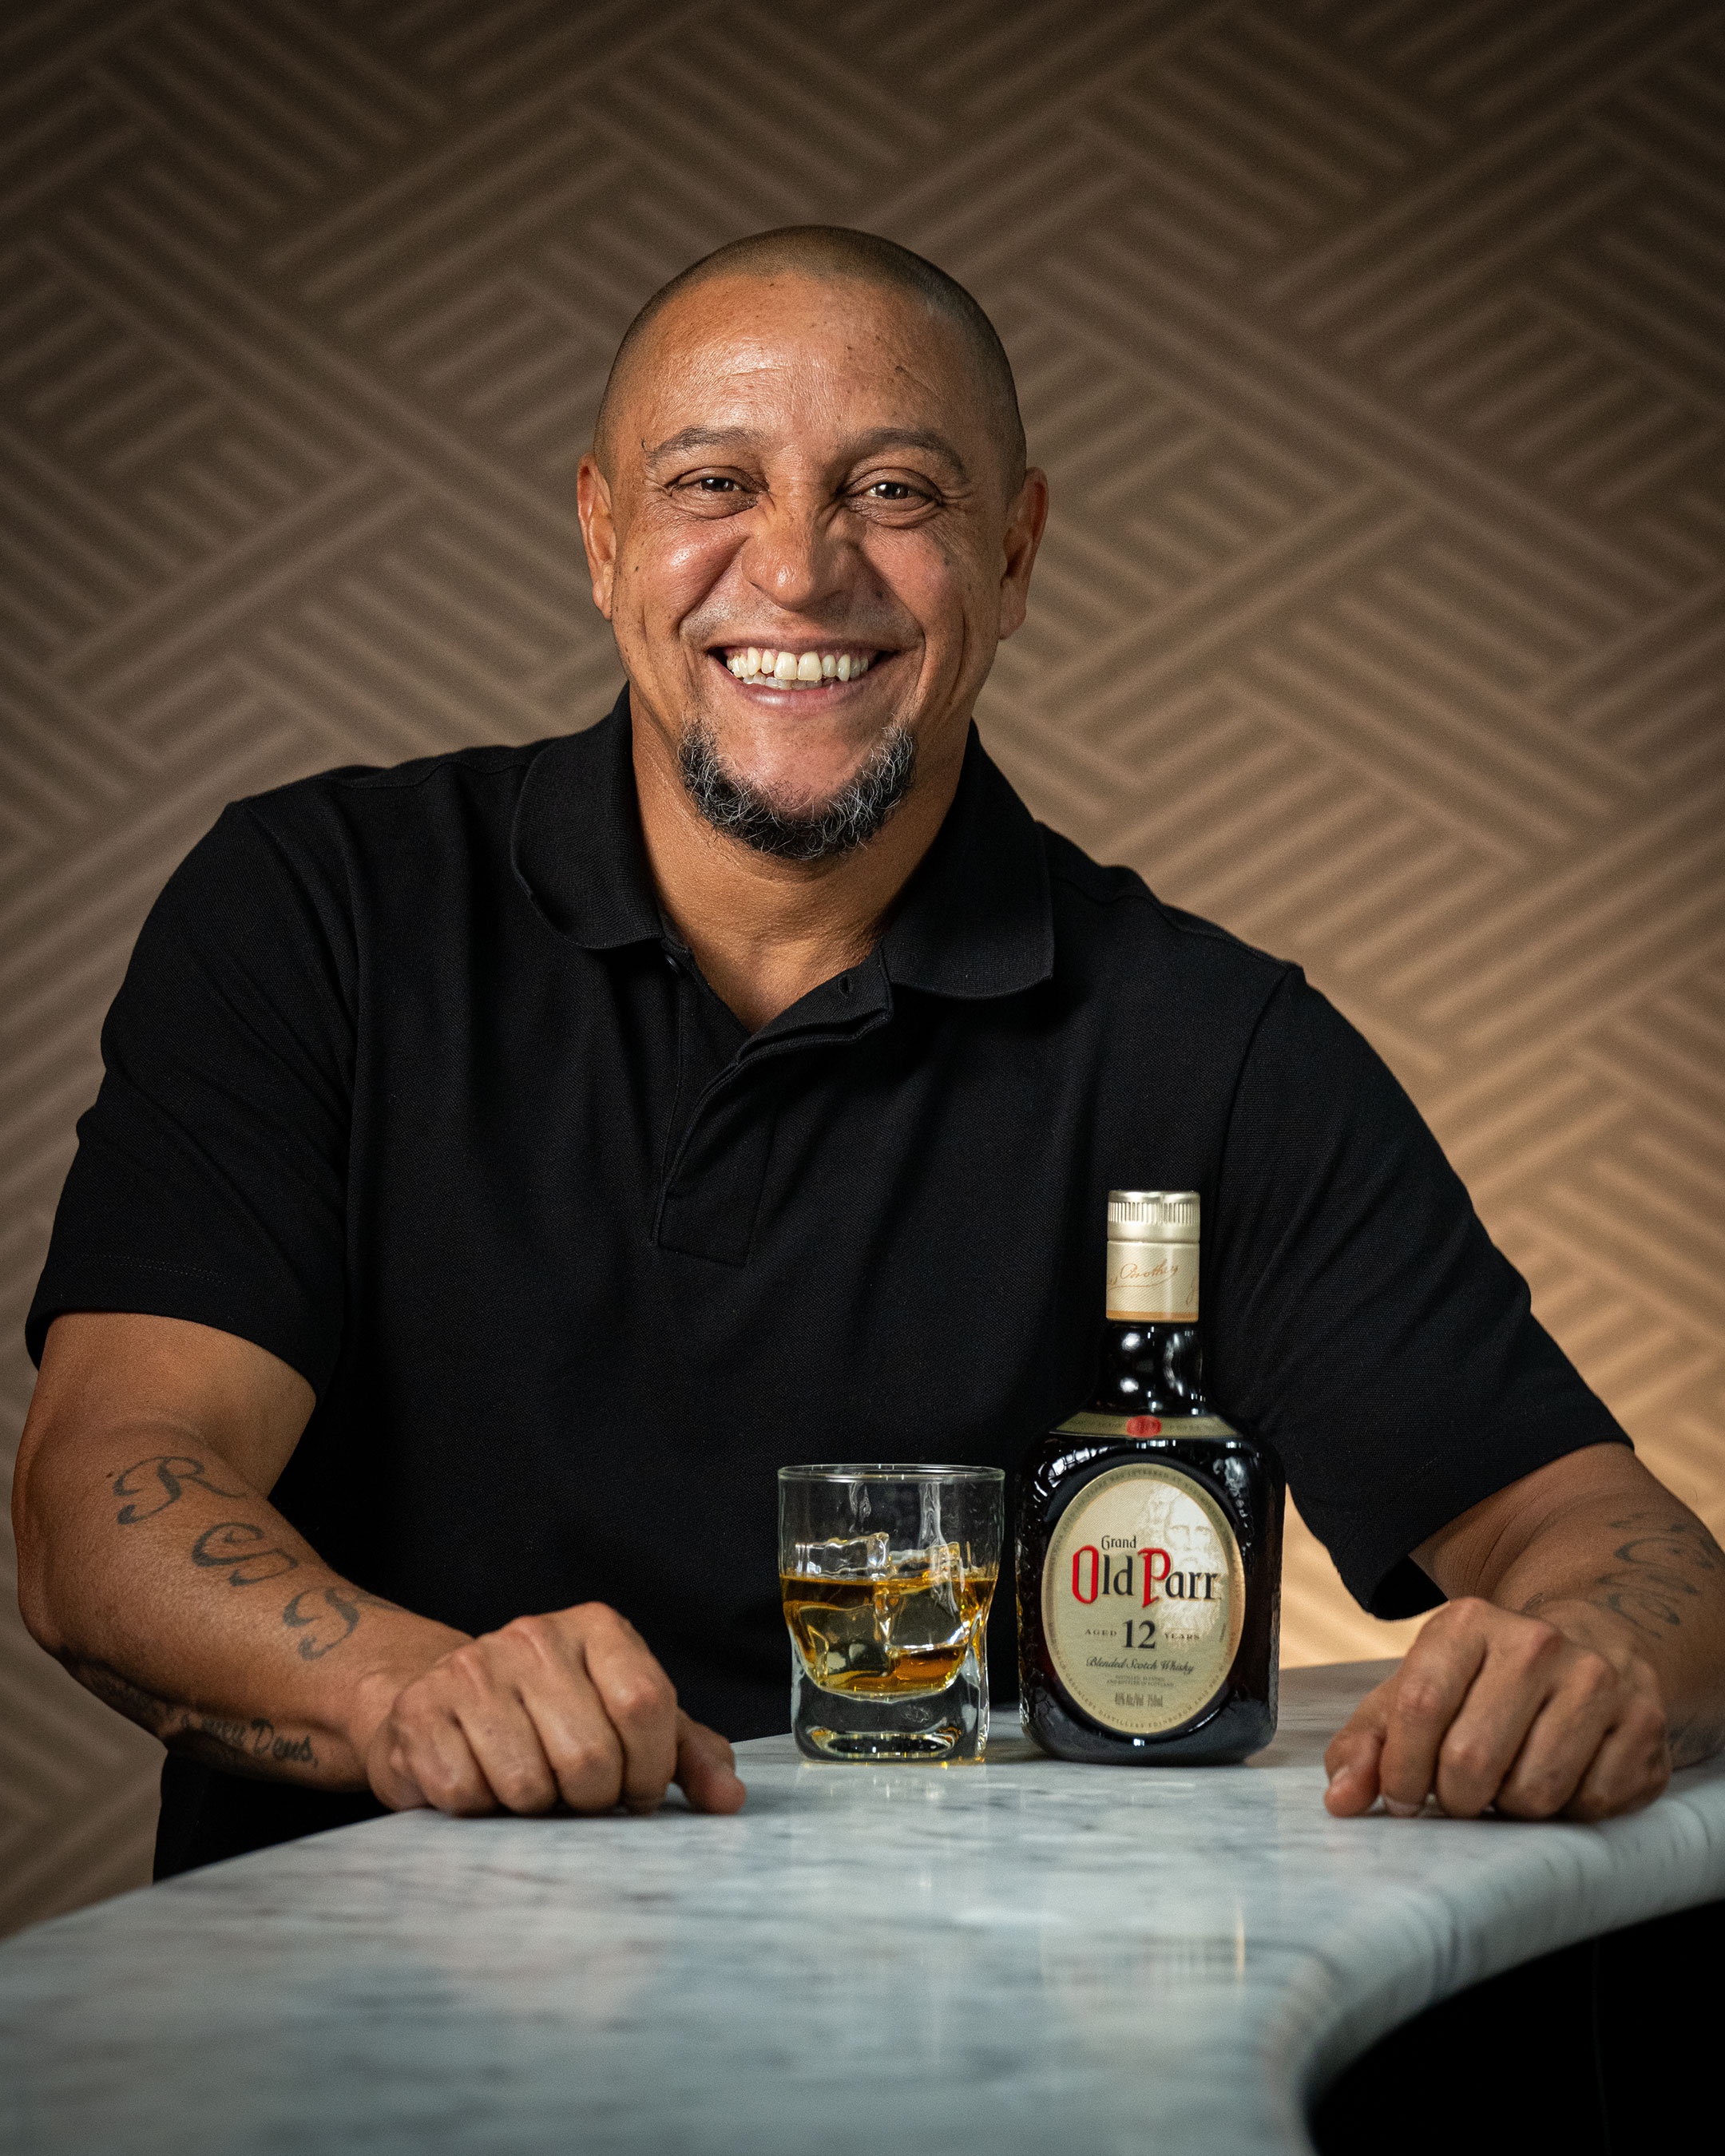 Old Parr Whisky partners with Brazilian fútbol legend Roberto Carlos to bring the Goalden Moments to fútbol fans across the U.S.